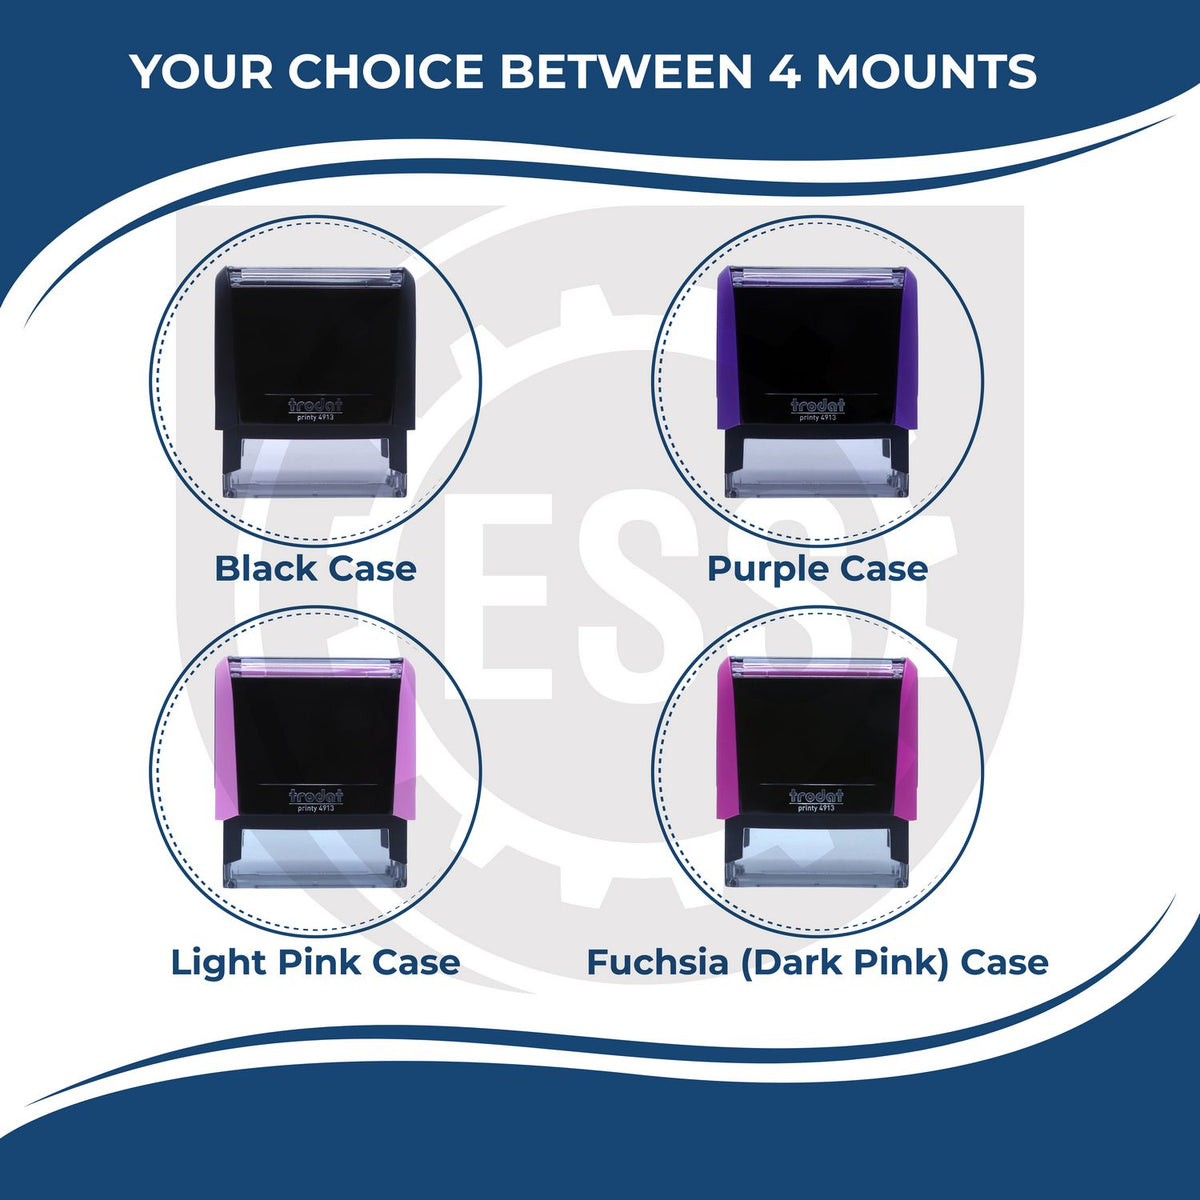 A picture of different colored mounts for the Self-Inking State Seal Virginia Notary Stamp featurning a Red, Blue or Black Mount